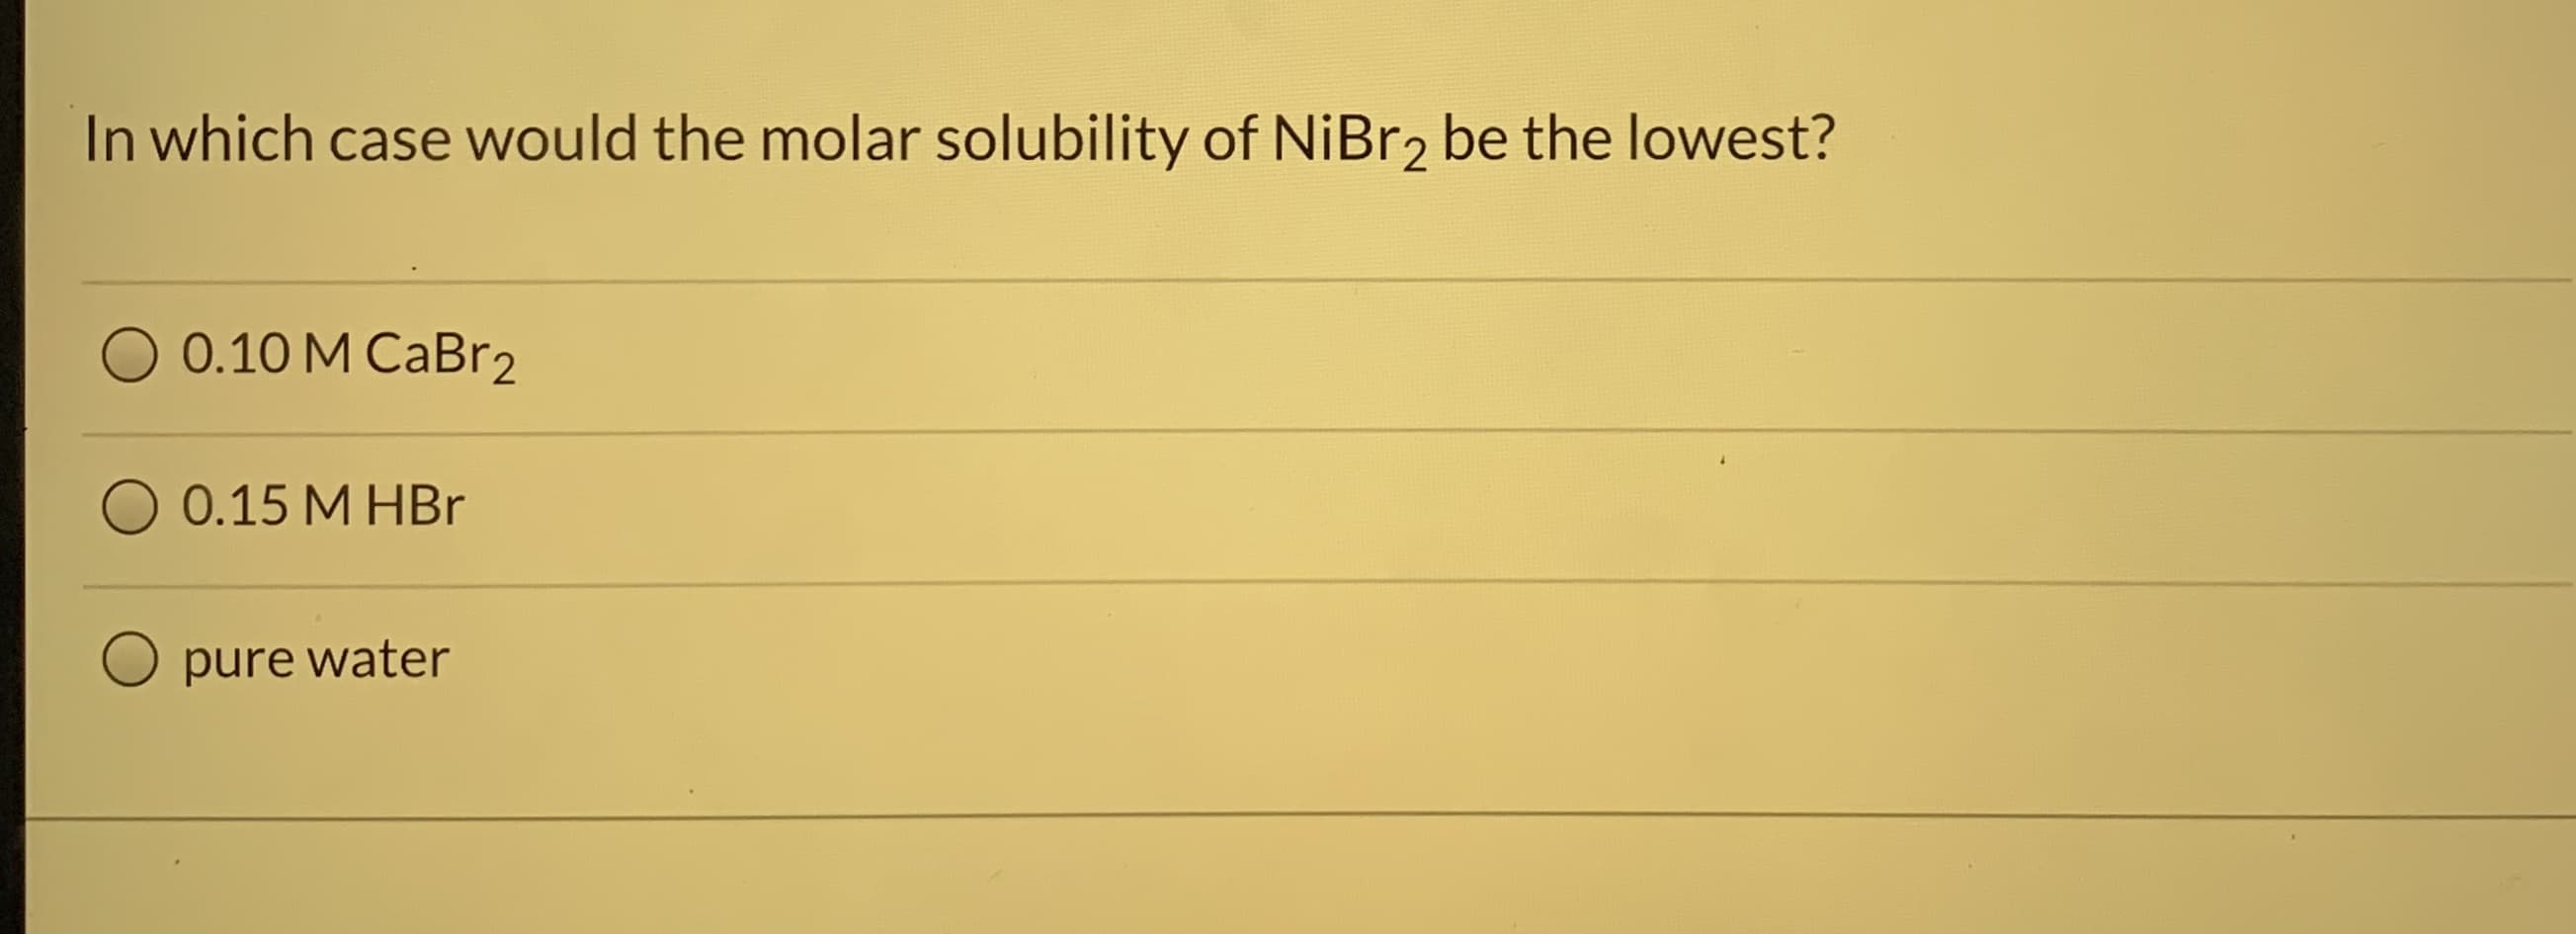 In which case would the molar solubility of NİBR2 be the lowest?
0.10 M CaBr2
O 0.15 M HBr
pure water
